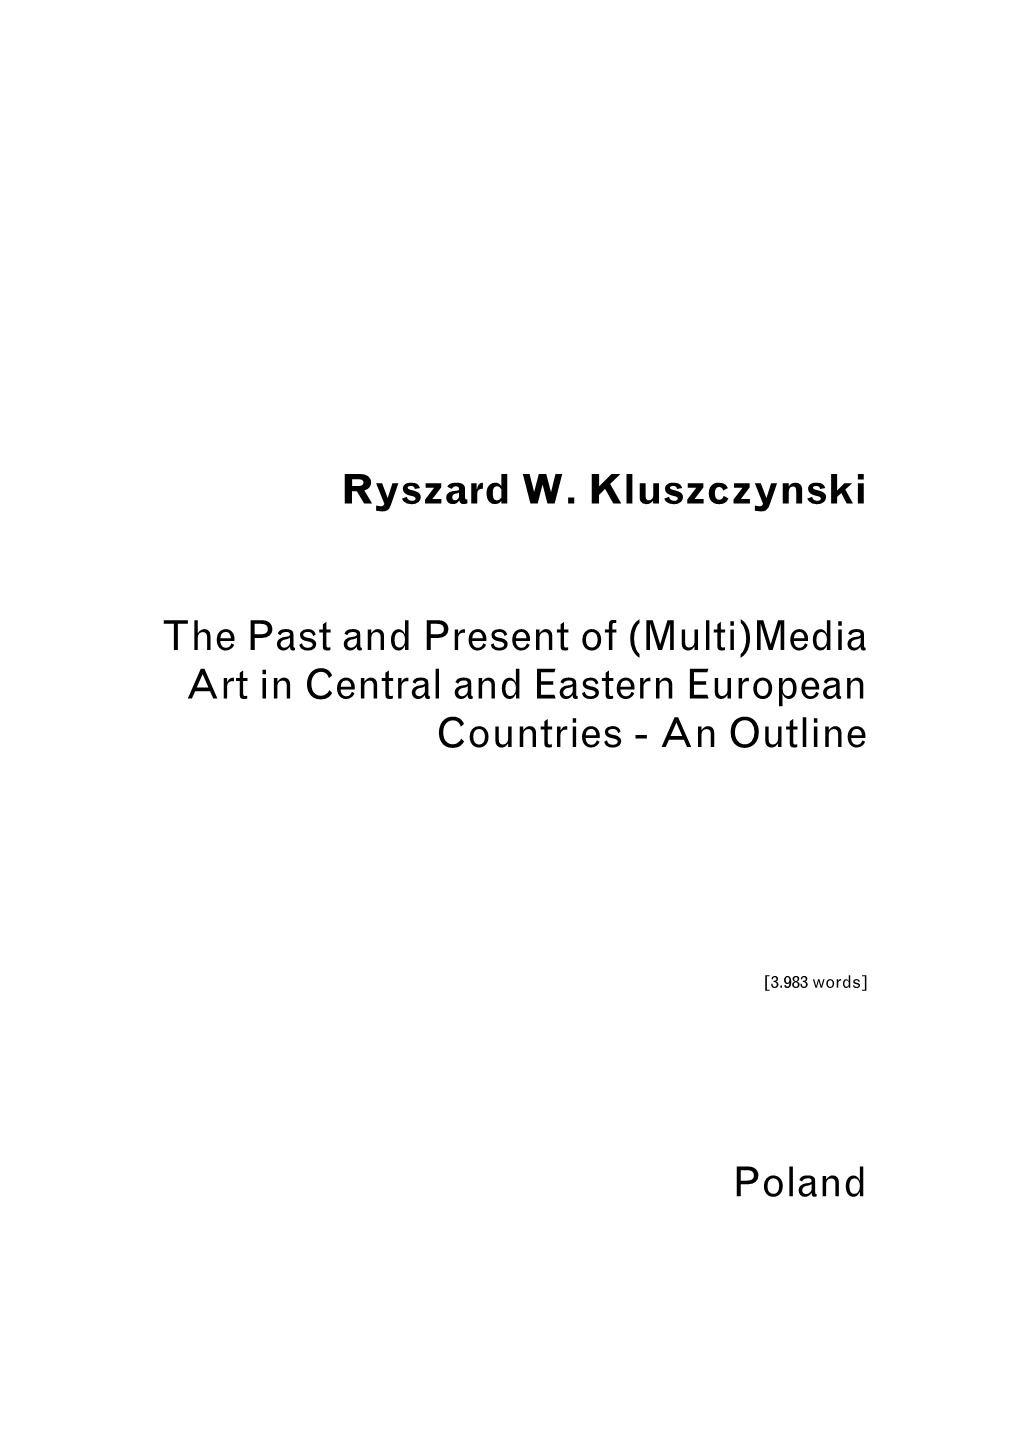 Media Art in Central and Eastern European Countries - an Outline